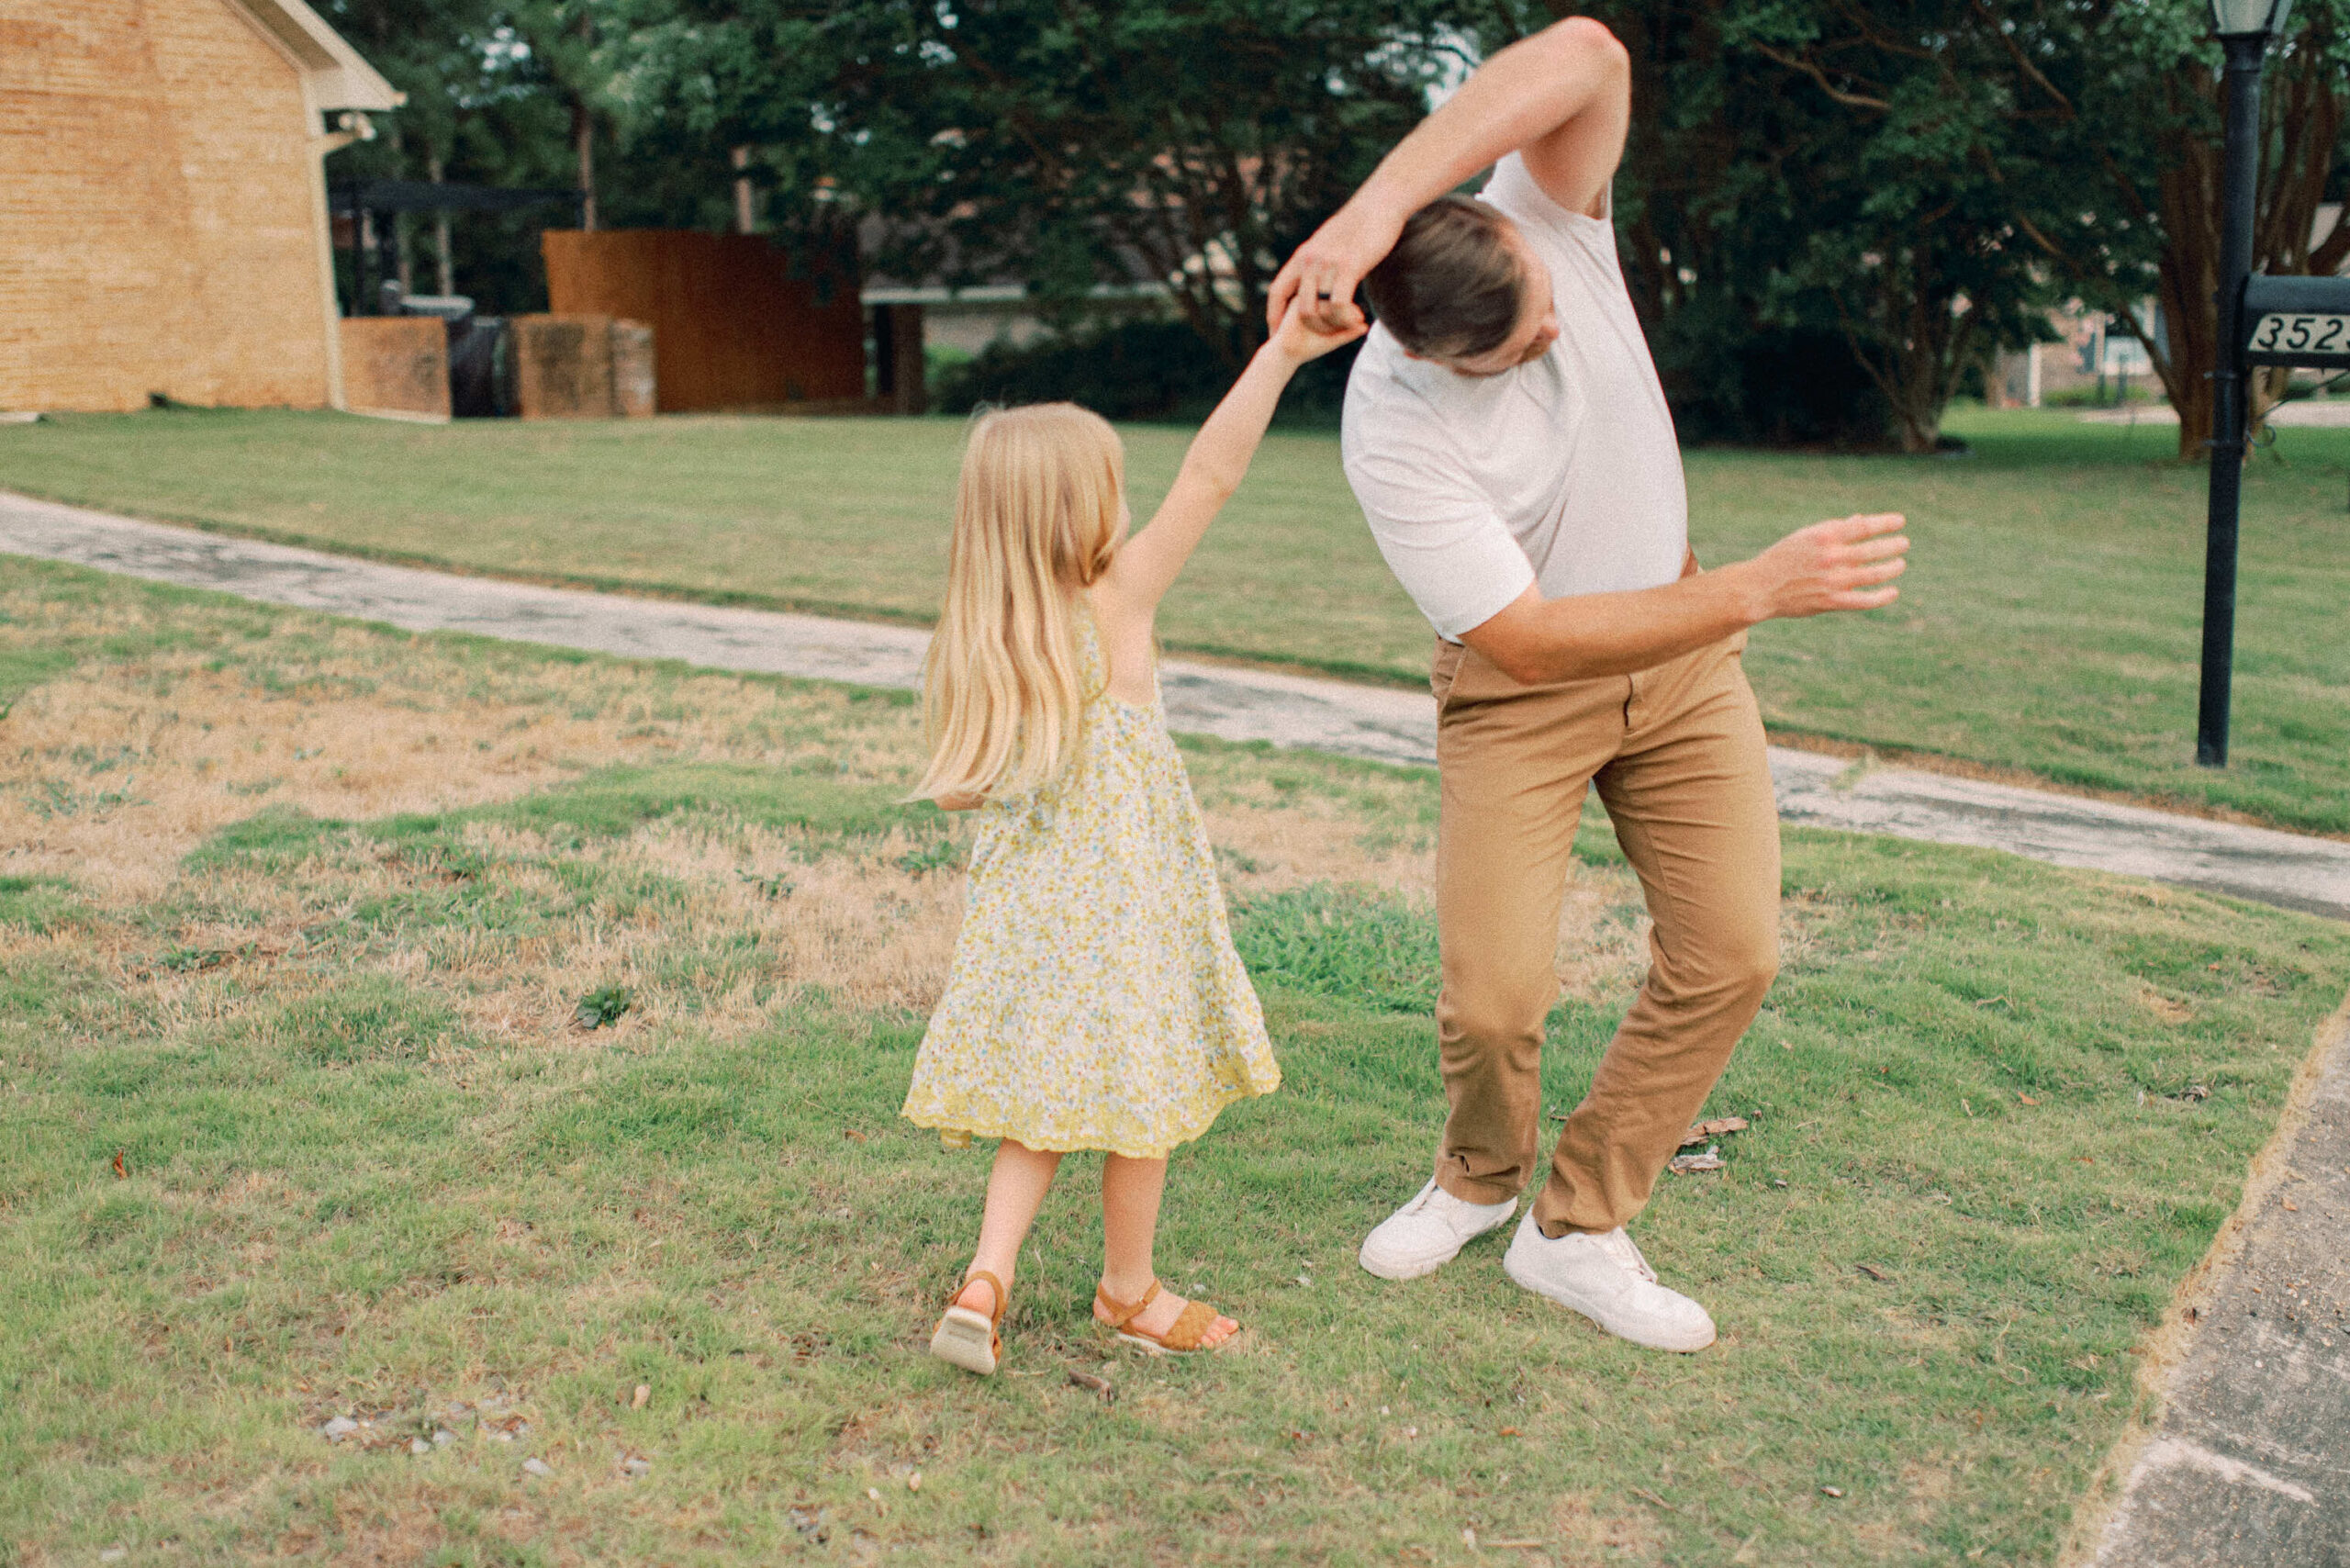 Dad being silly dancing with daughter dancing and twirling in front of their house in the yard